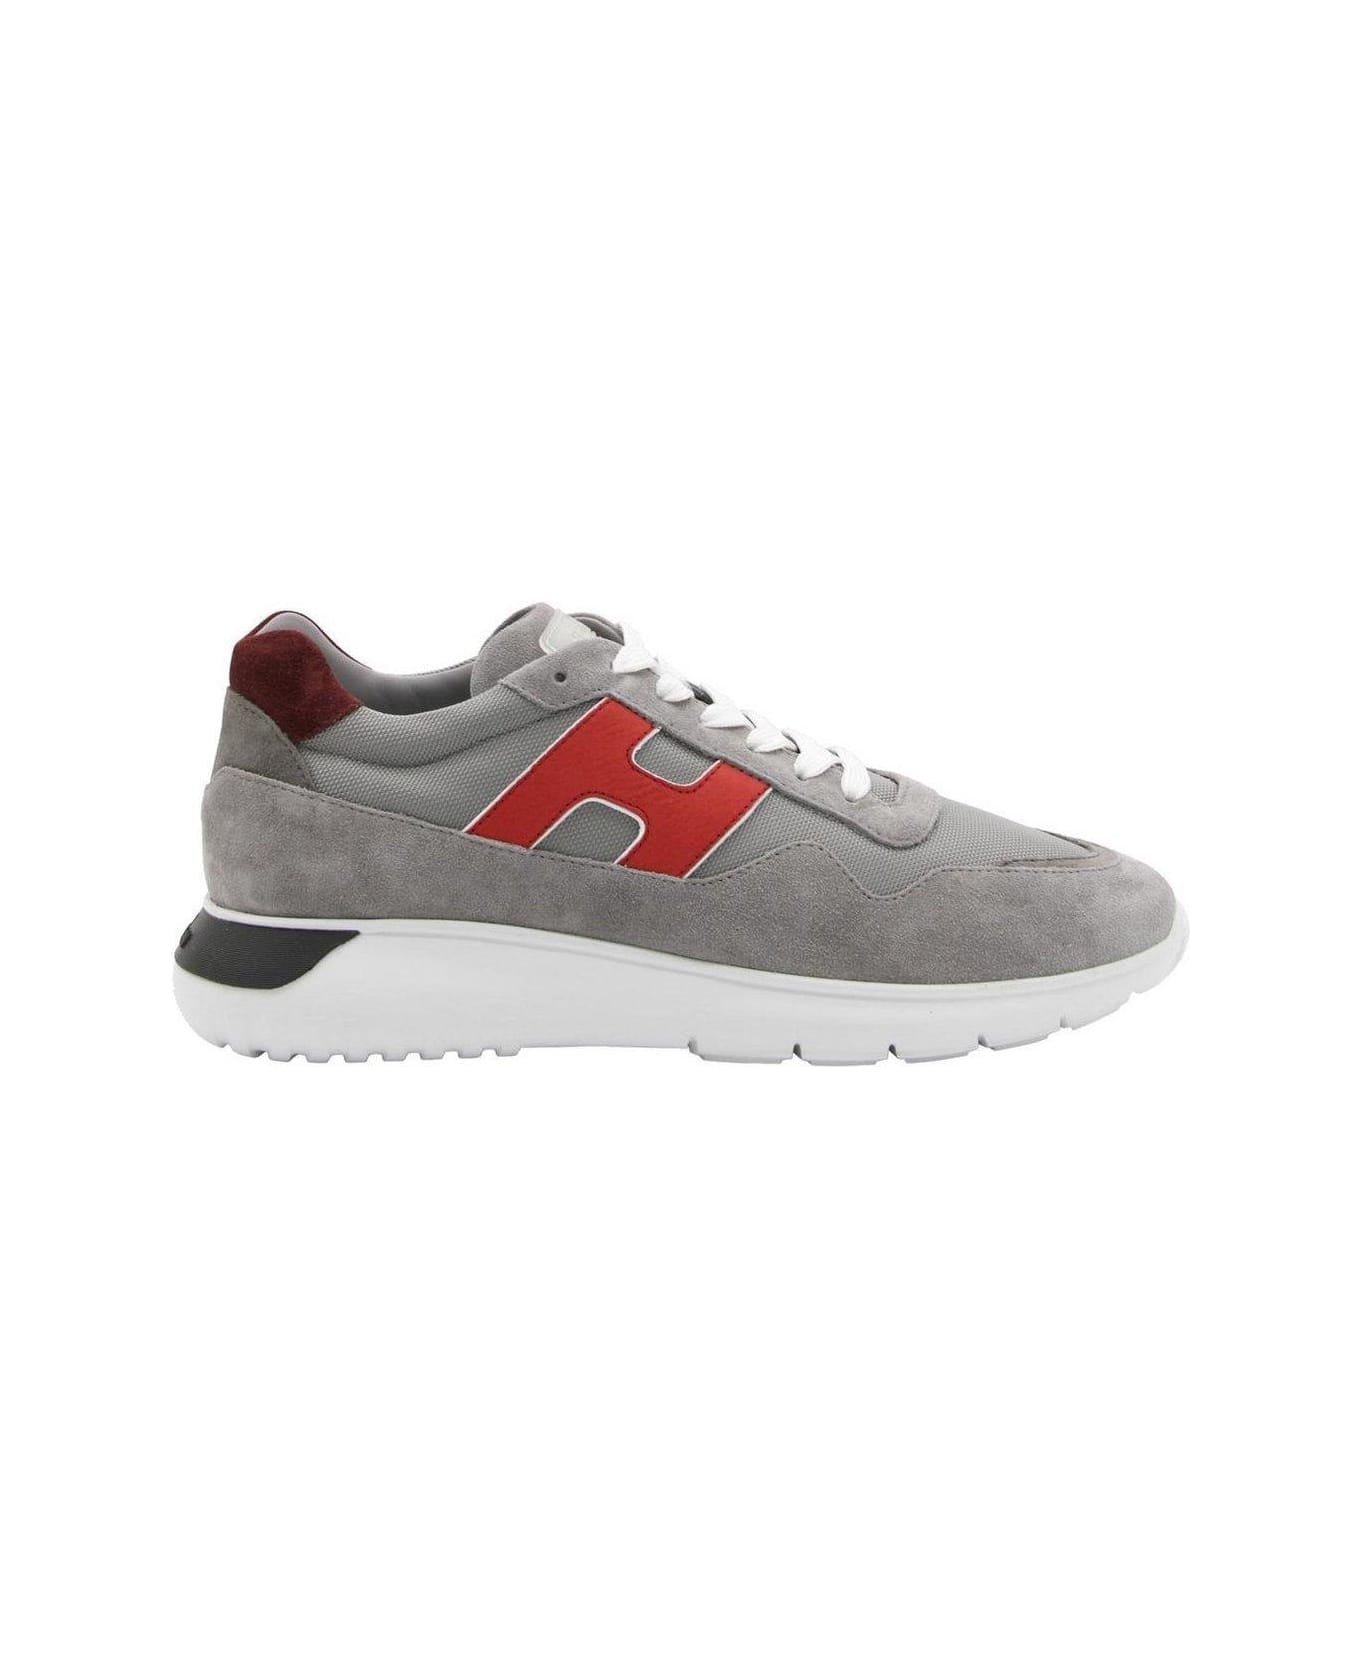 Hogan Interactive 3 Side H Patch Sneakers - GREY